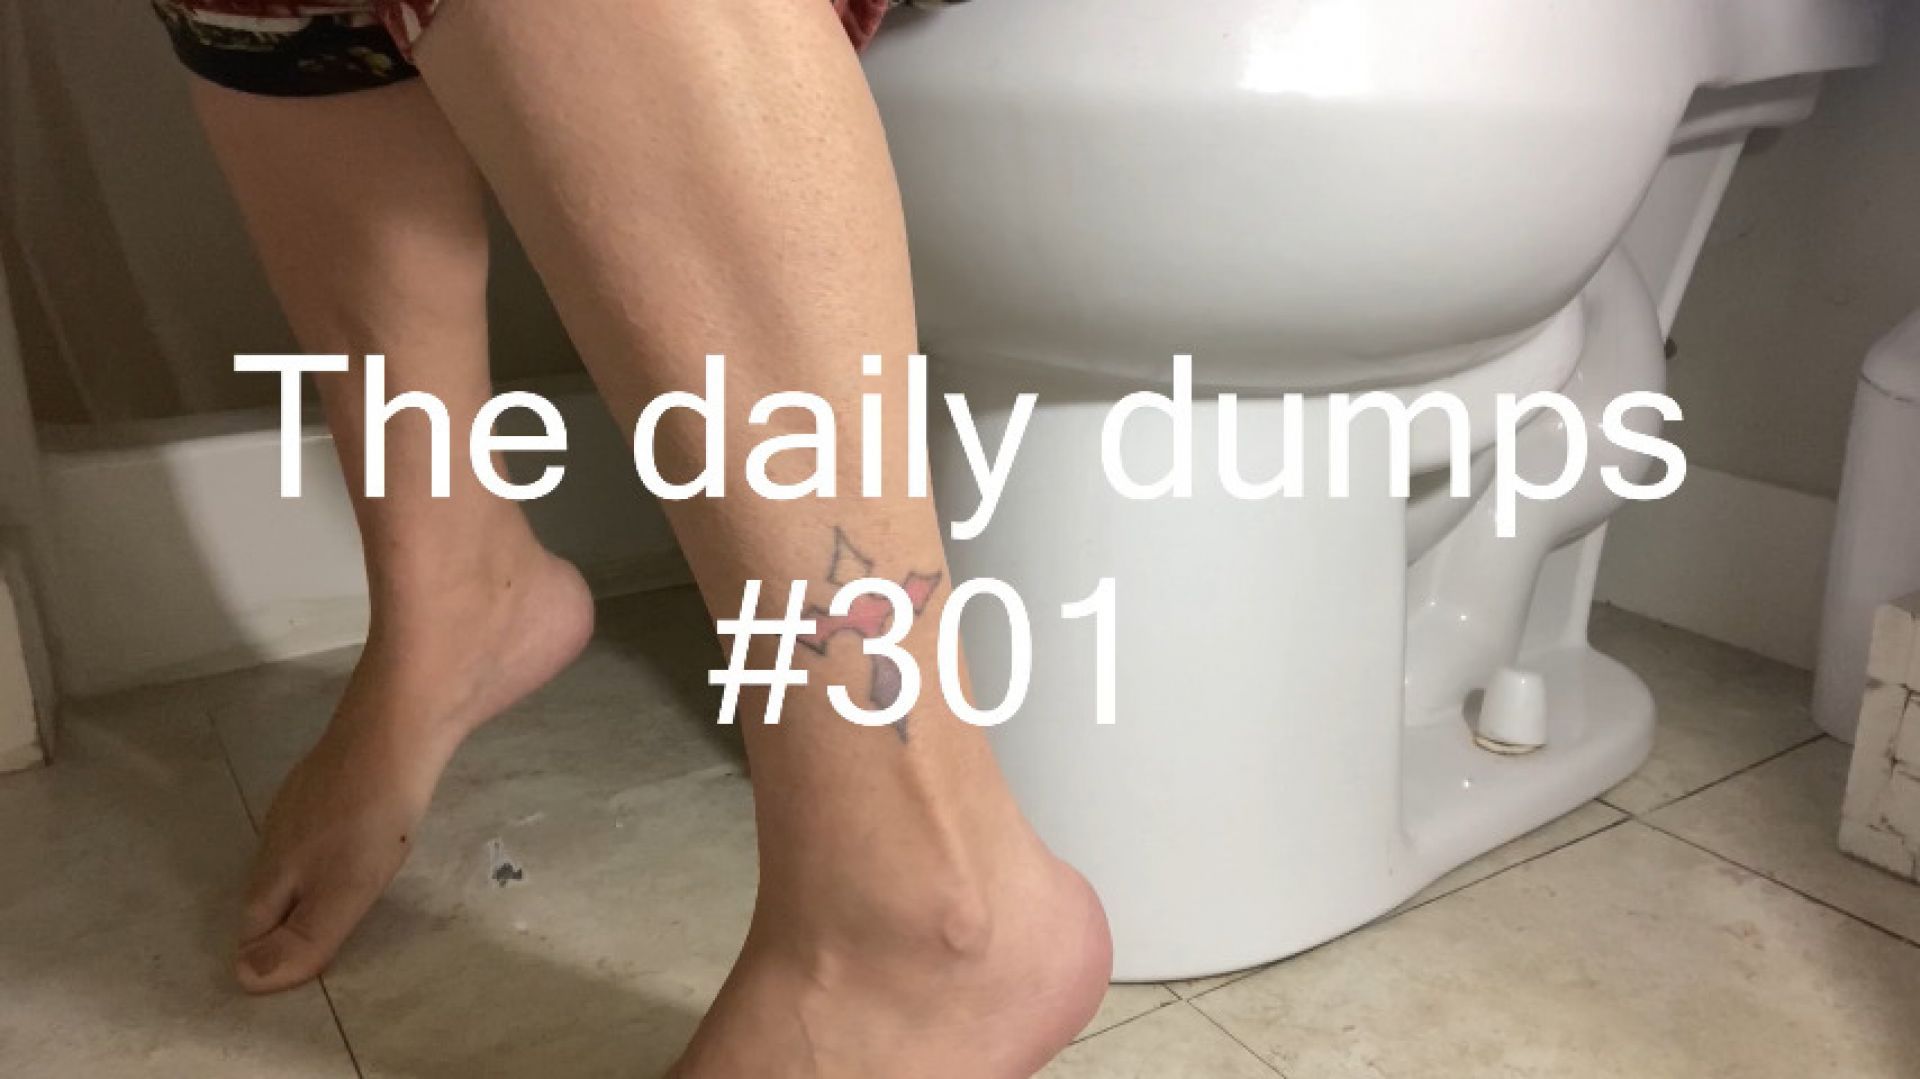 The daily dumps #301